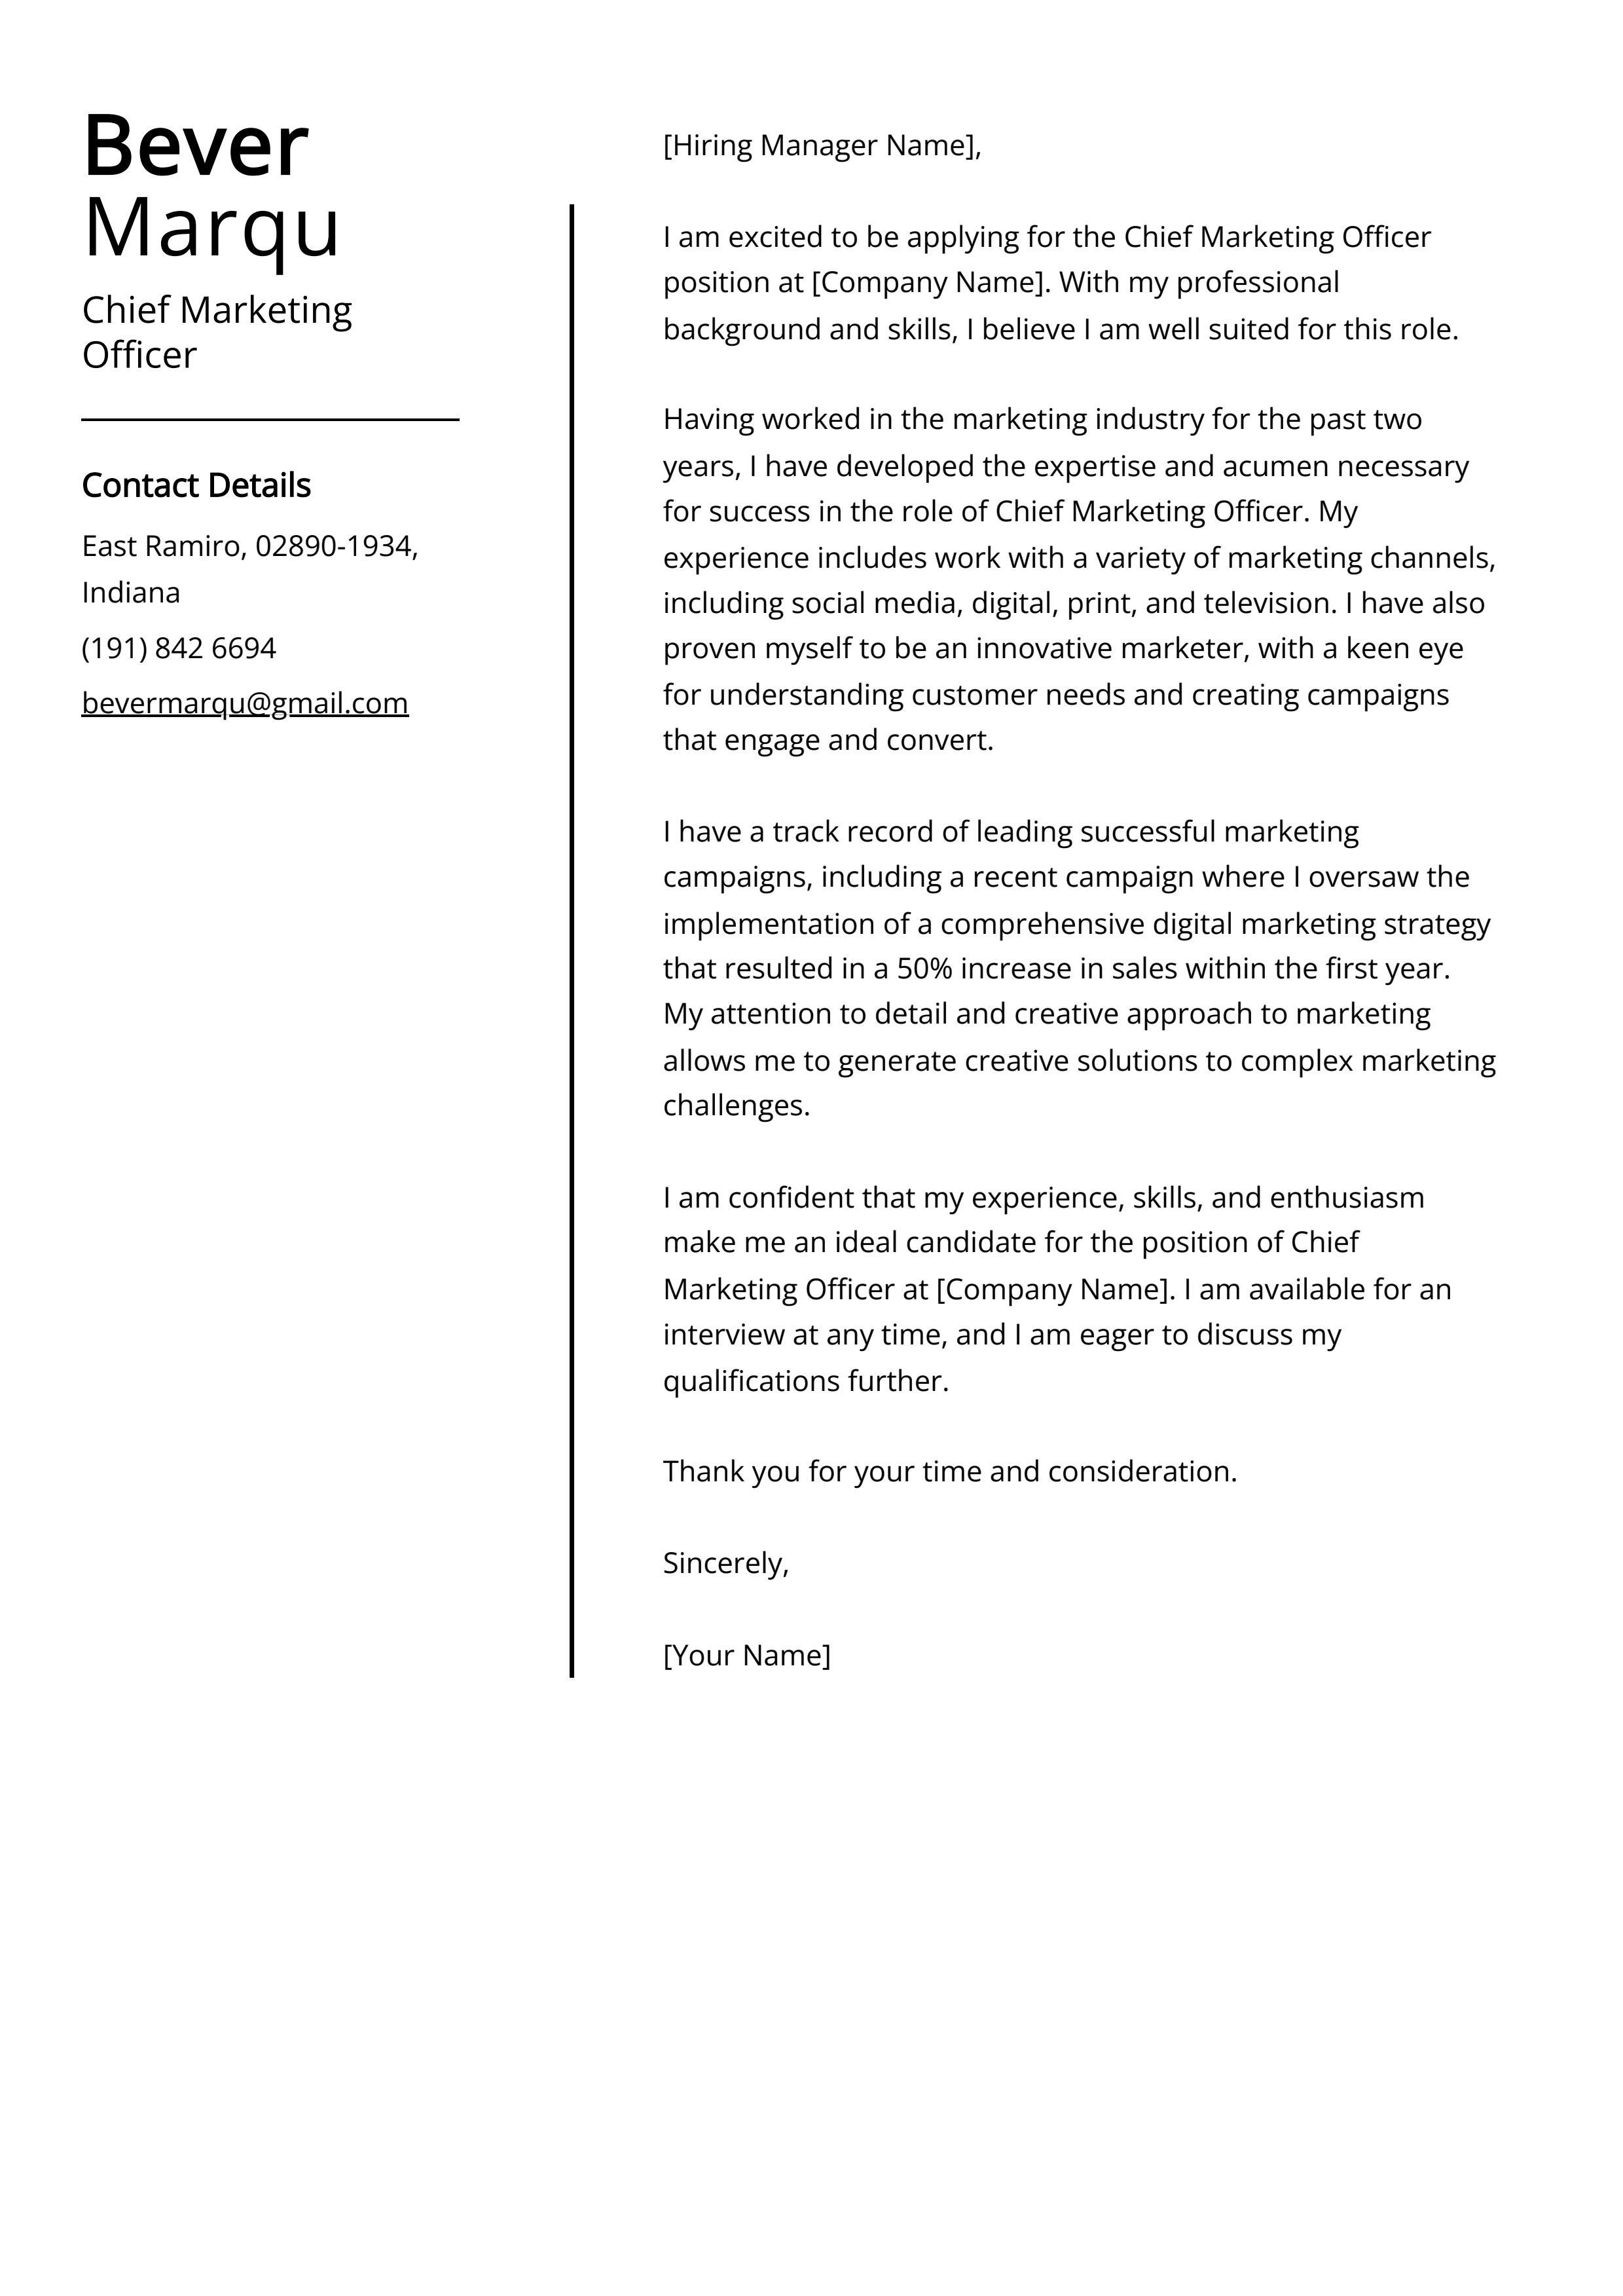 Chief Marketing Officer Cover Letter Example